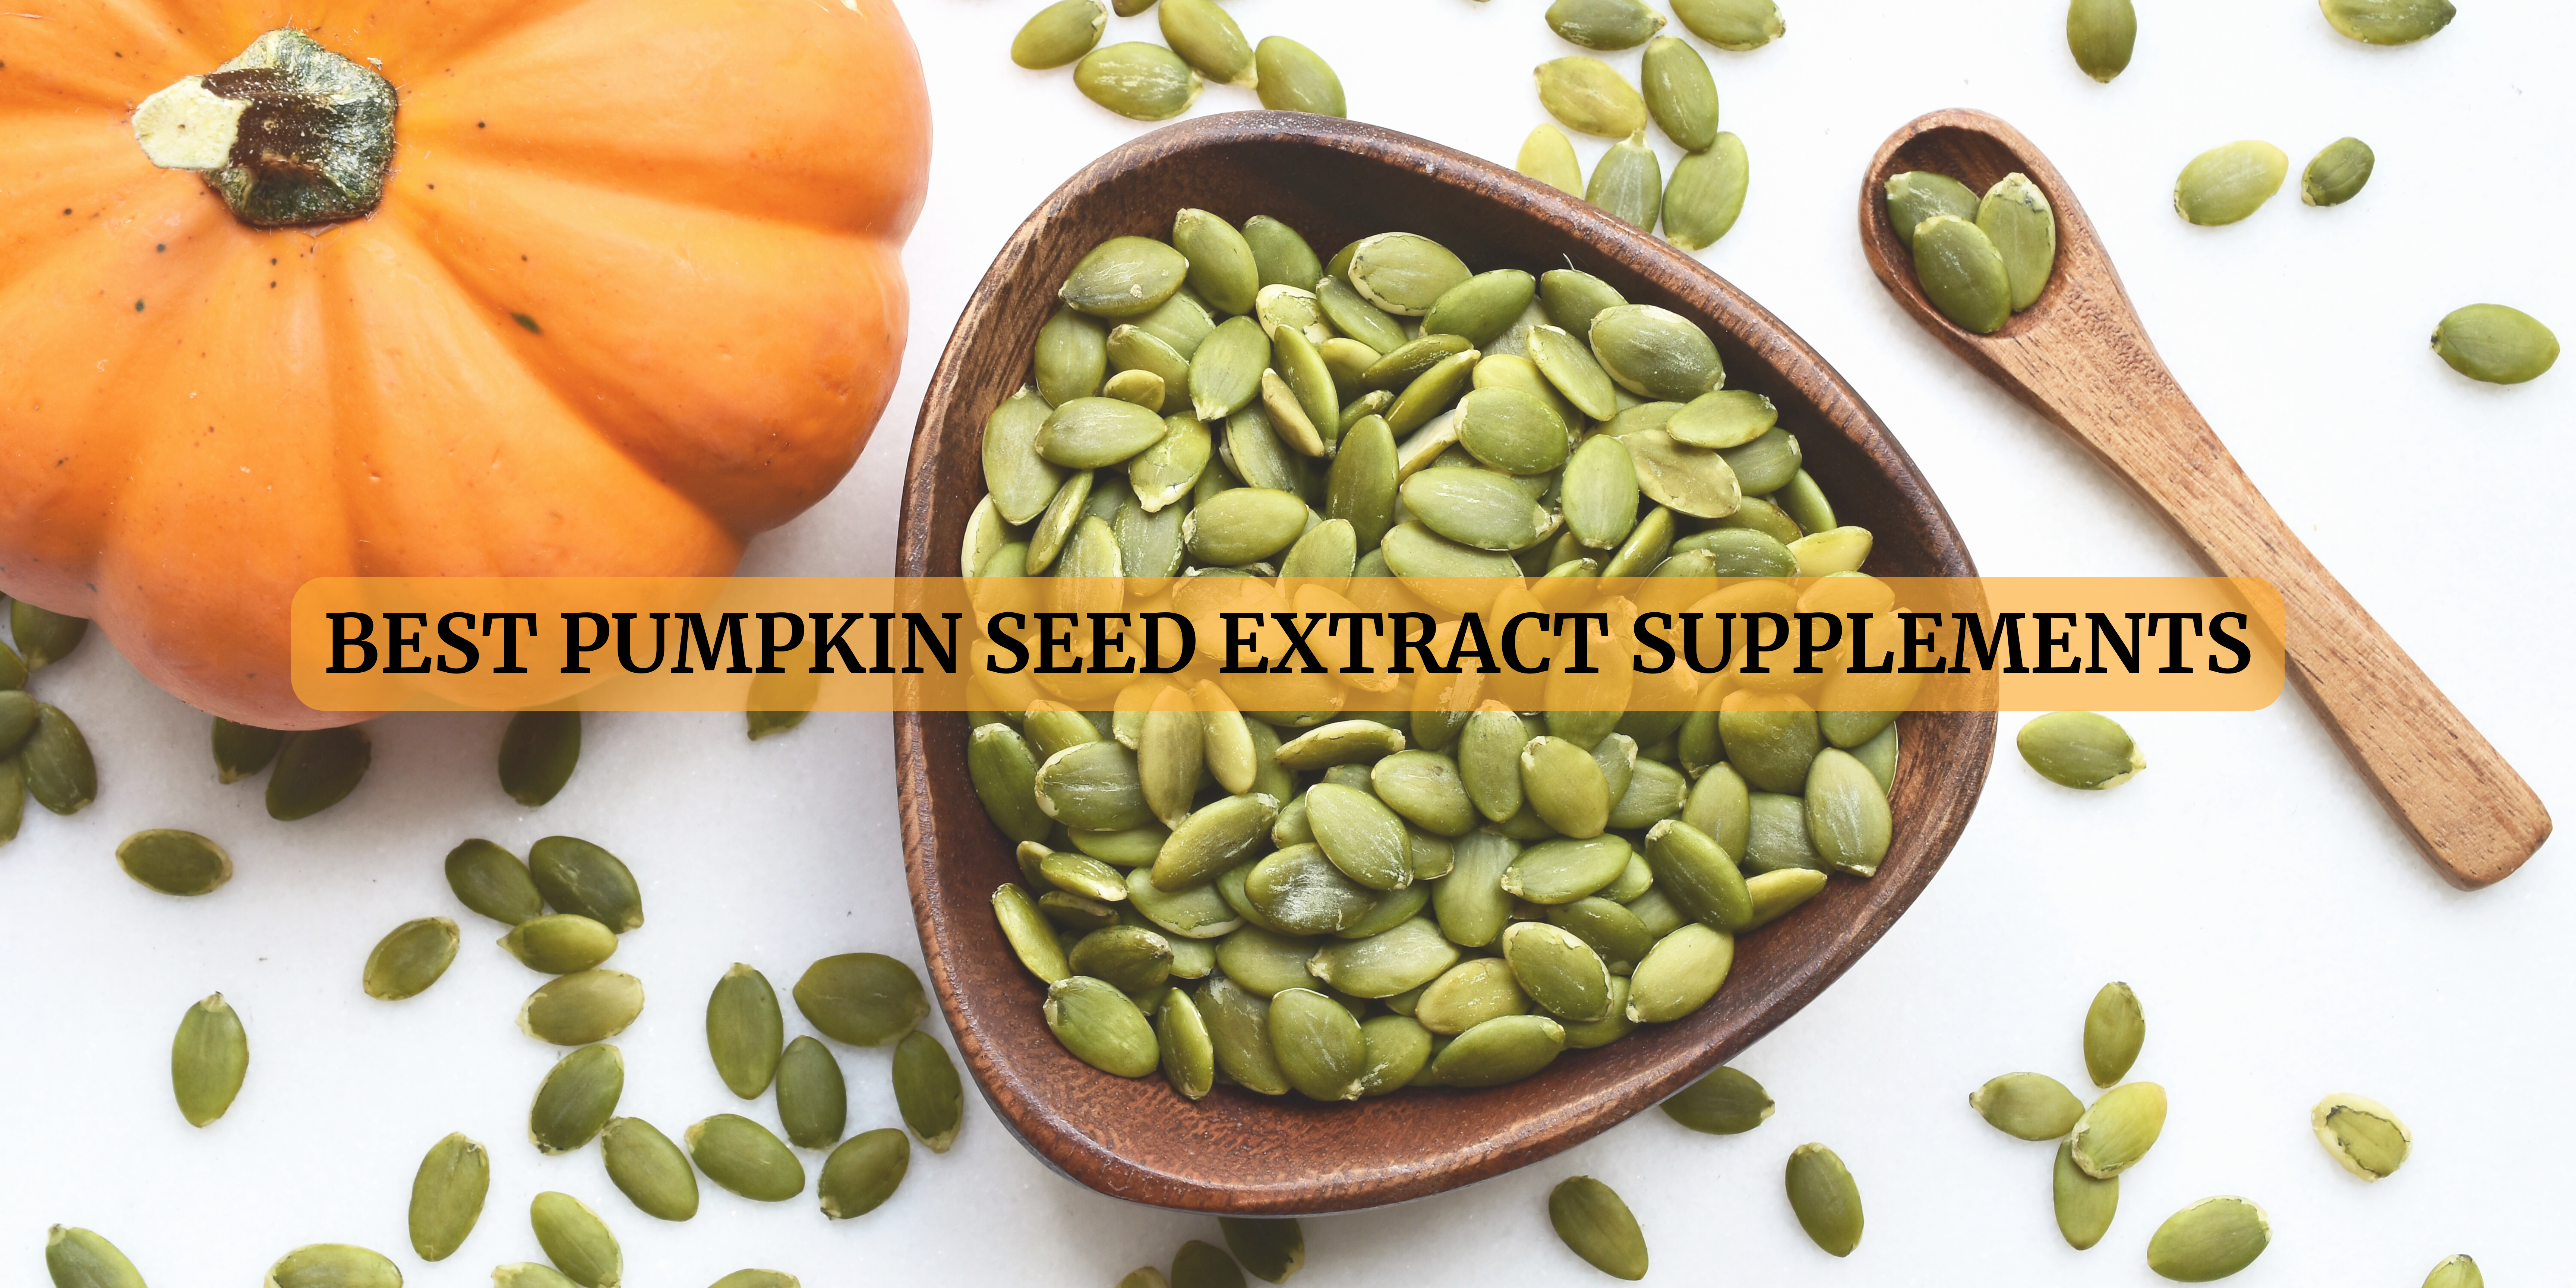 pumpkin seed extract supplements in Singapore